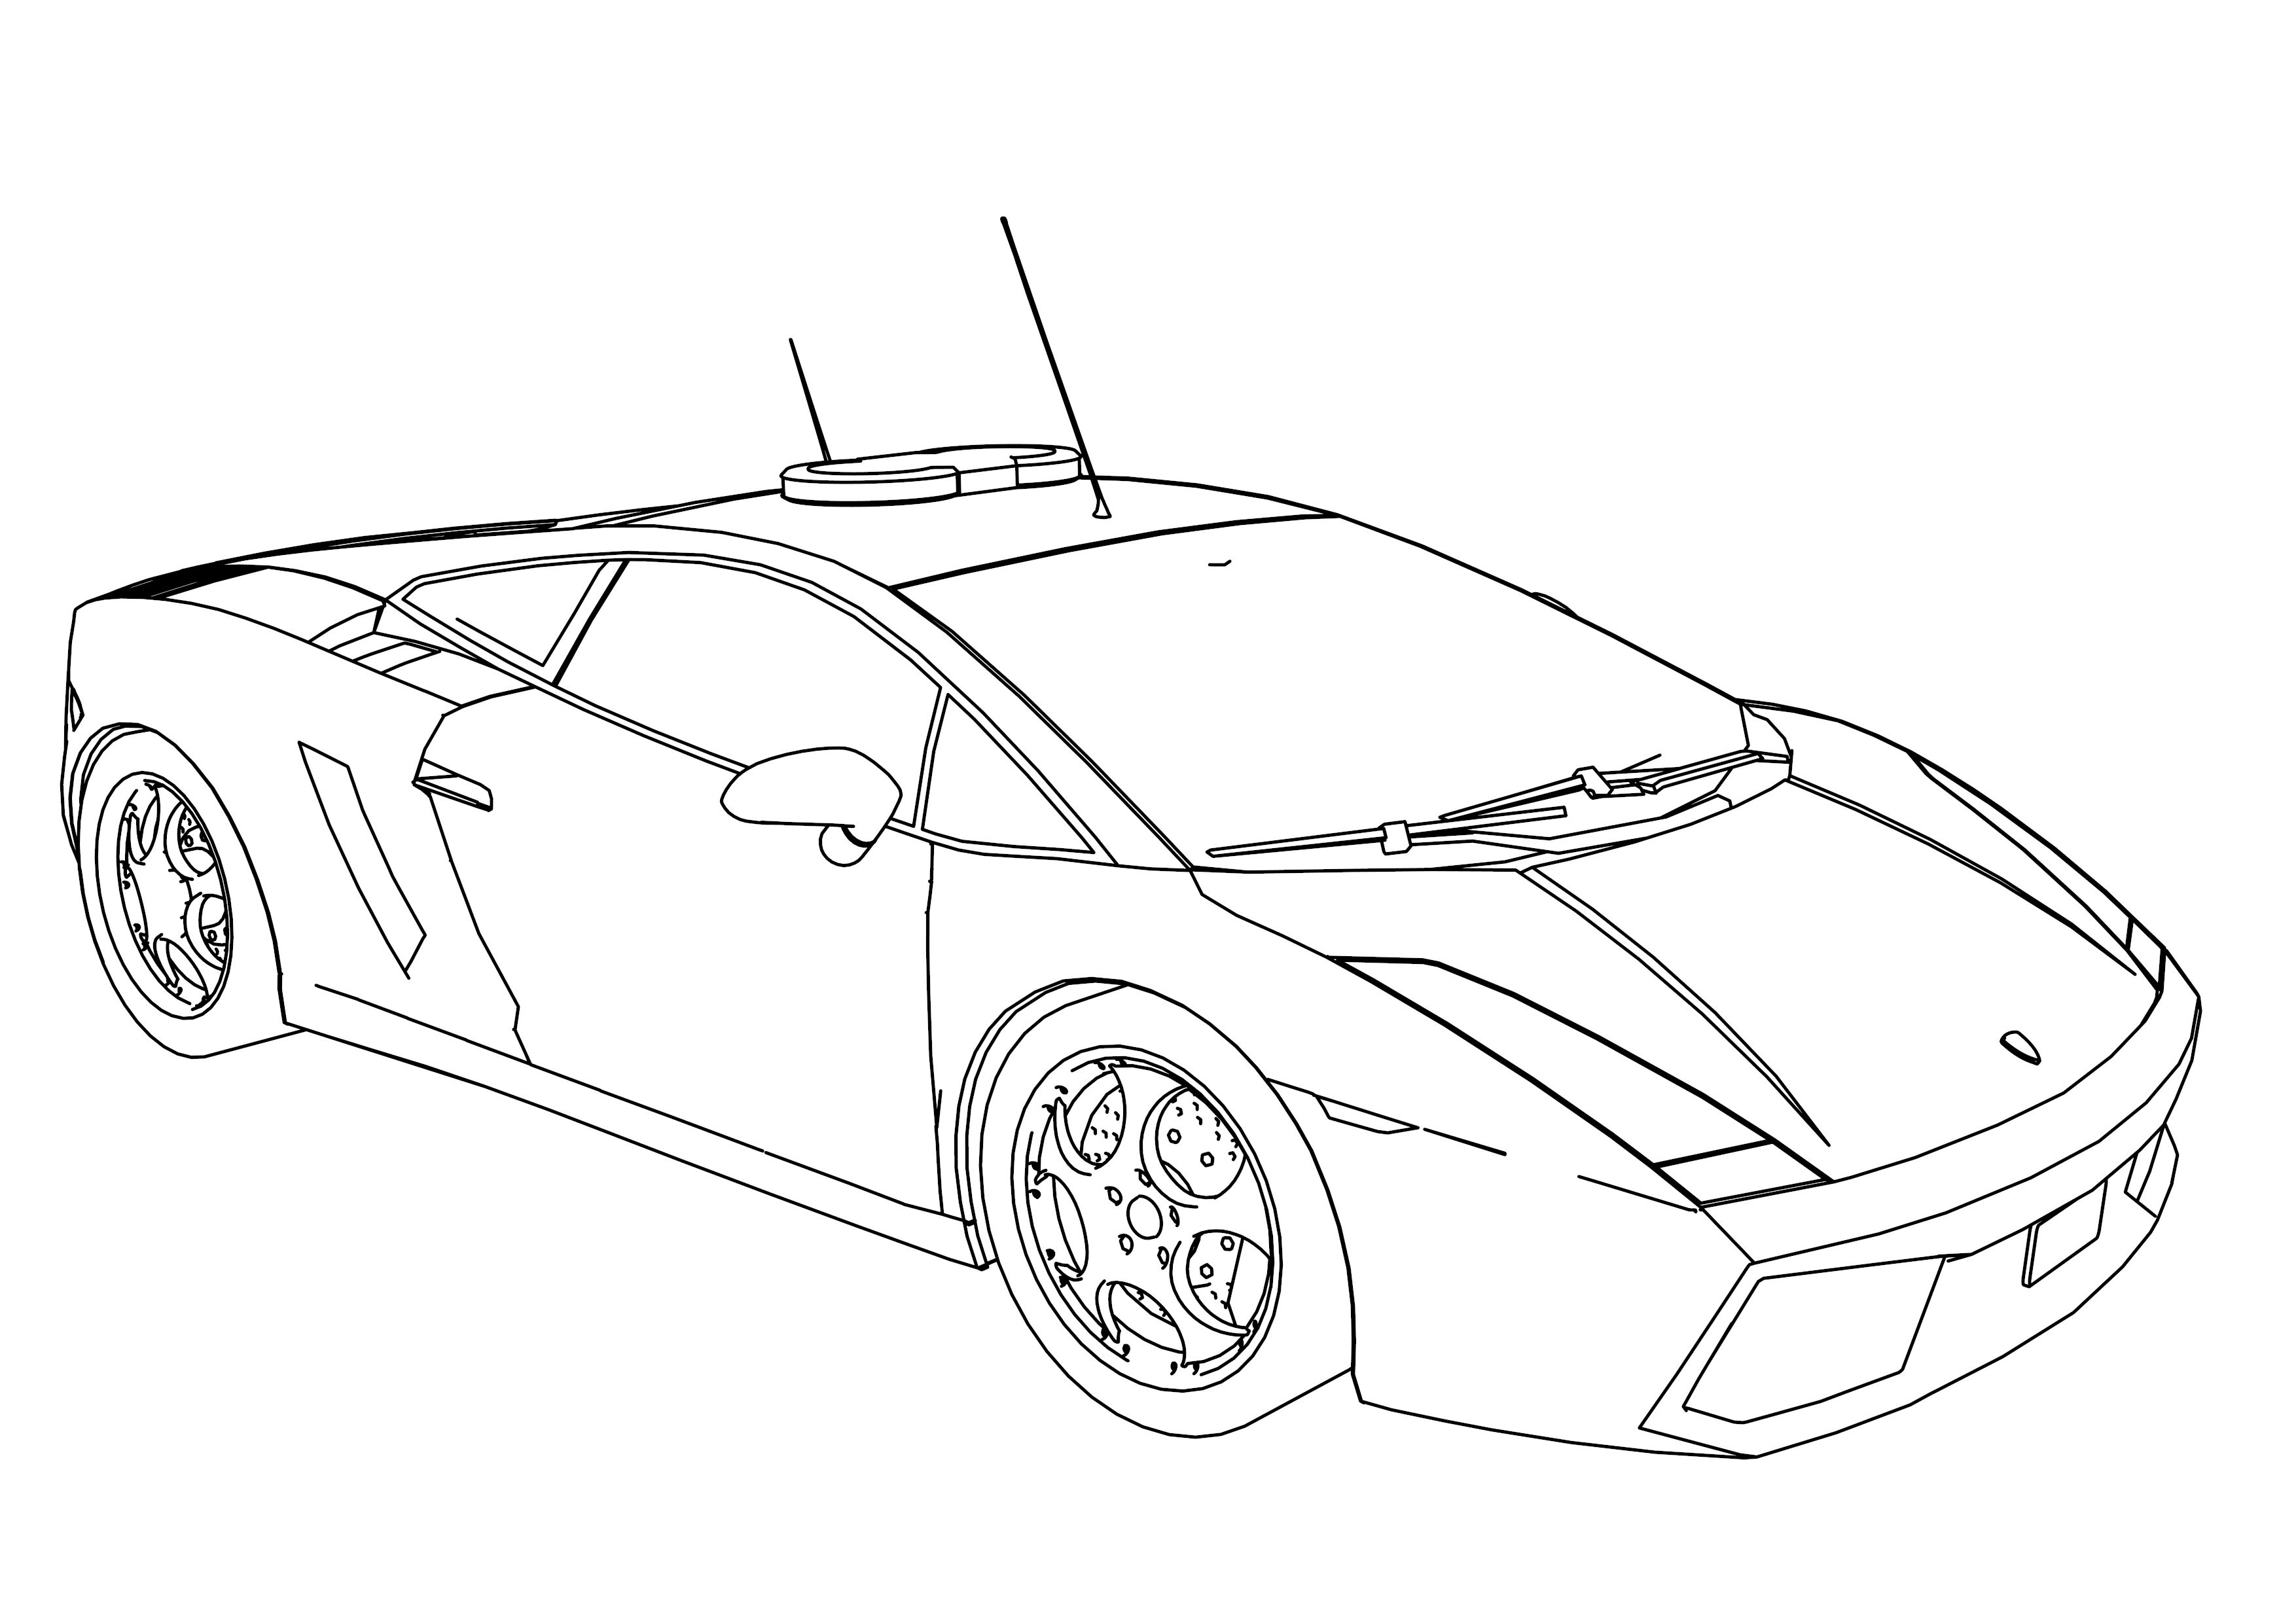 422 Simple Lego Car Coloring Pages for Kindergarten